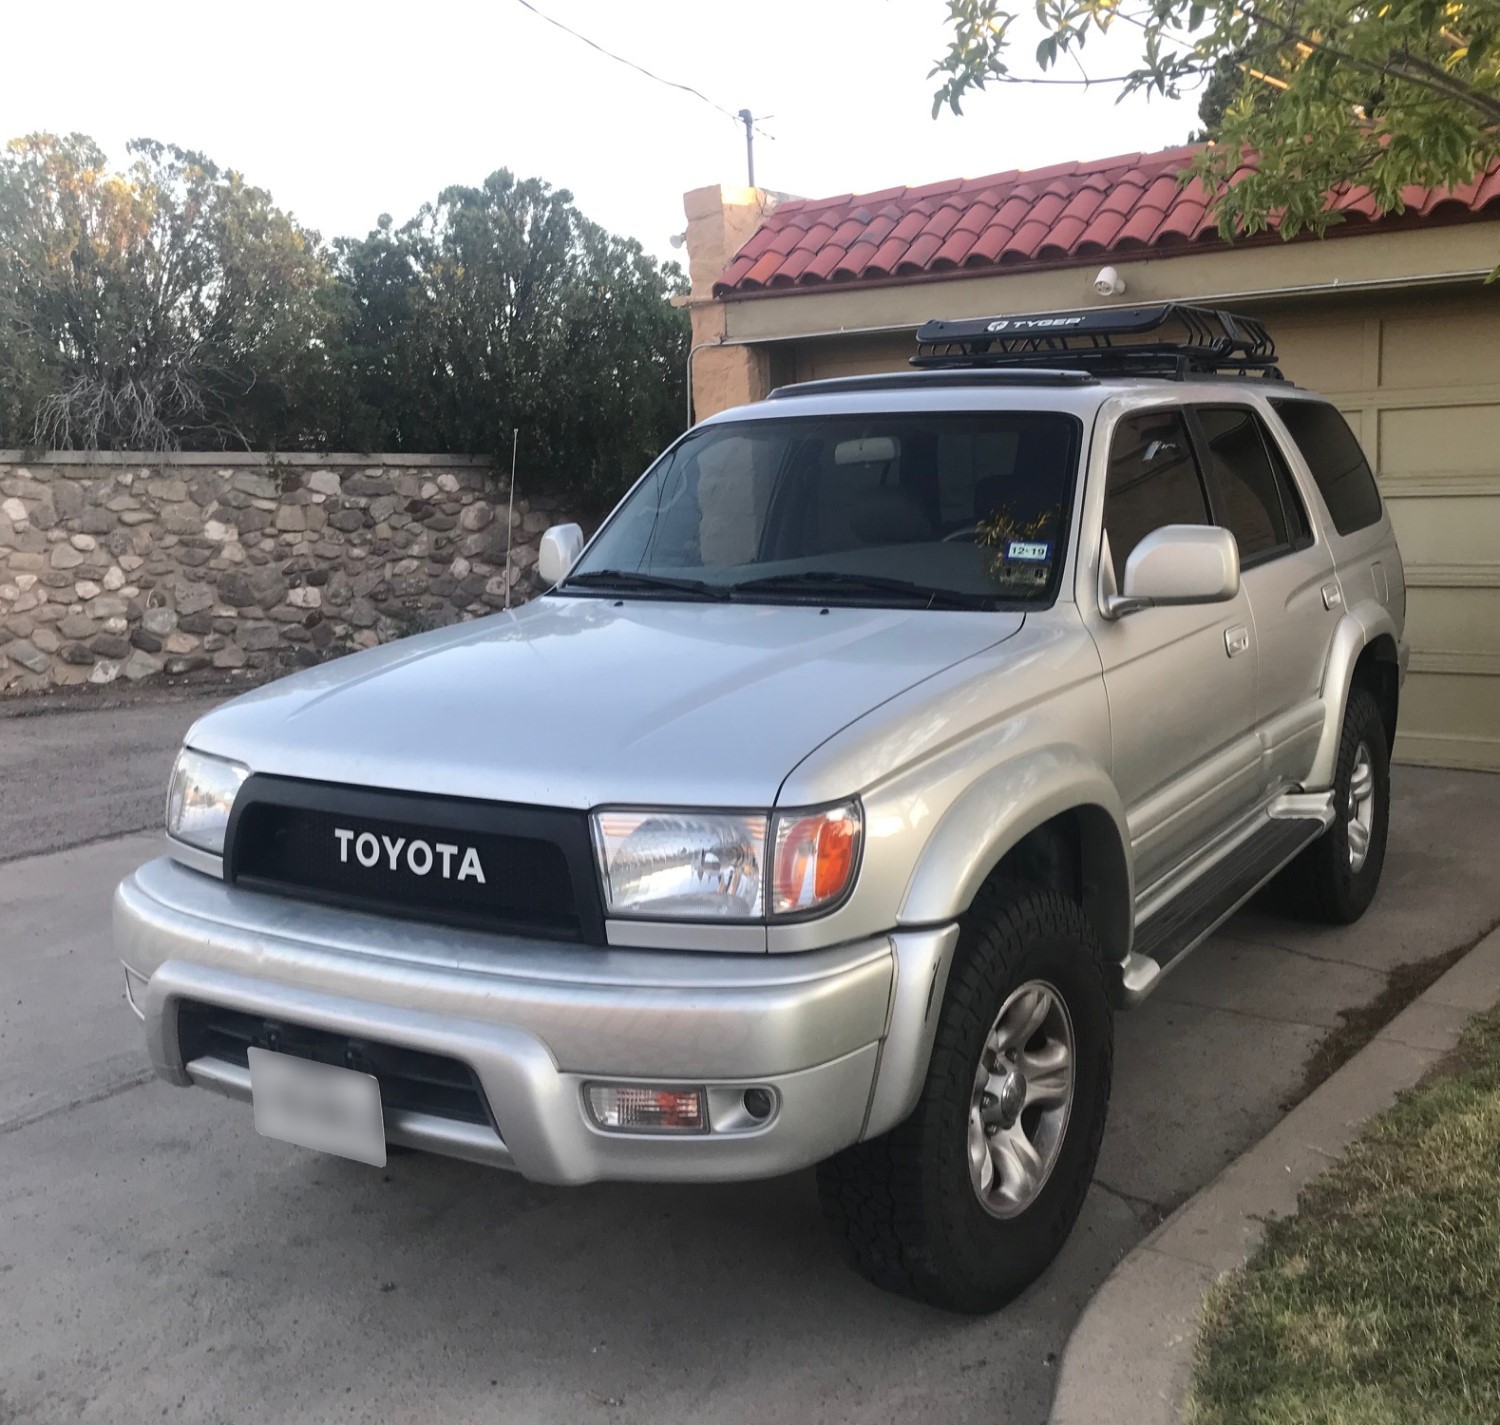 1996-98 (and 99-02*) Toyota 4Runner Grill Mesh With Toyota Emblem #4